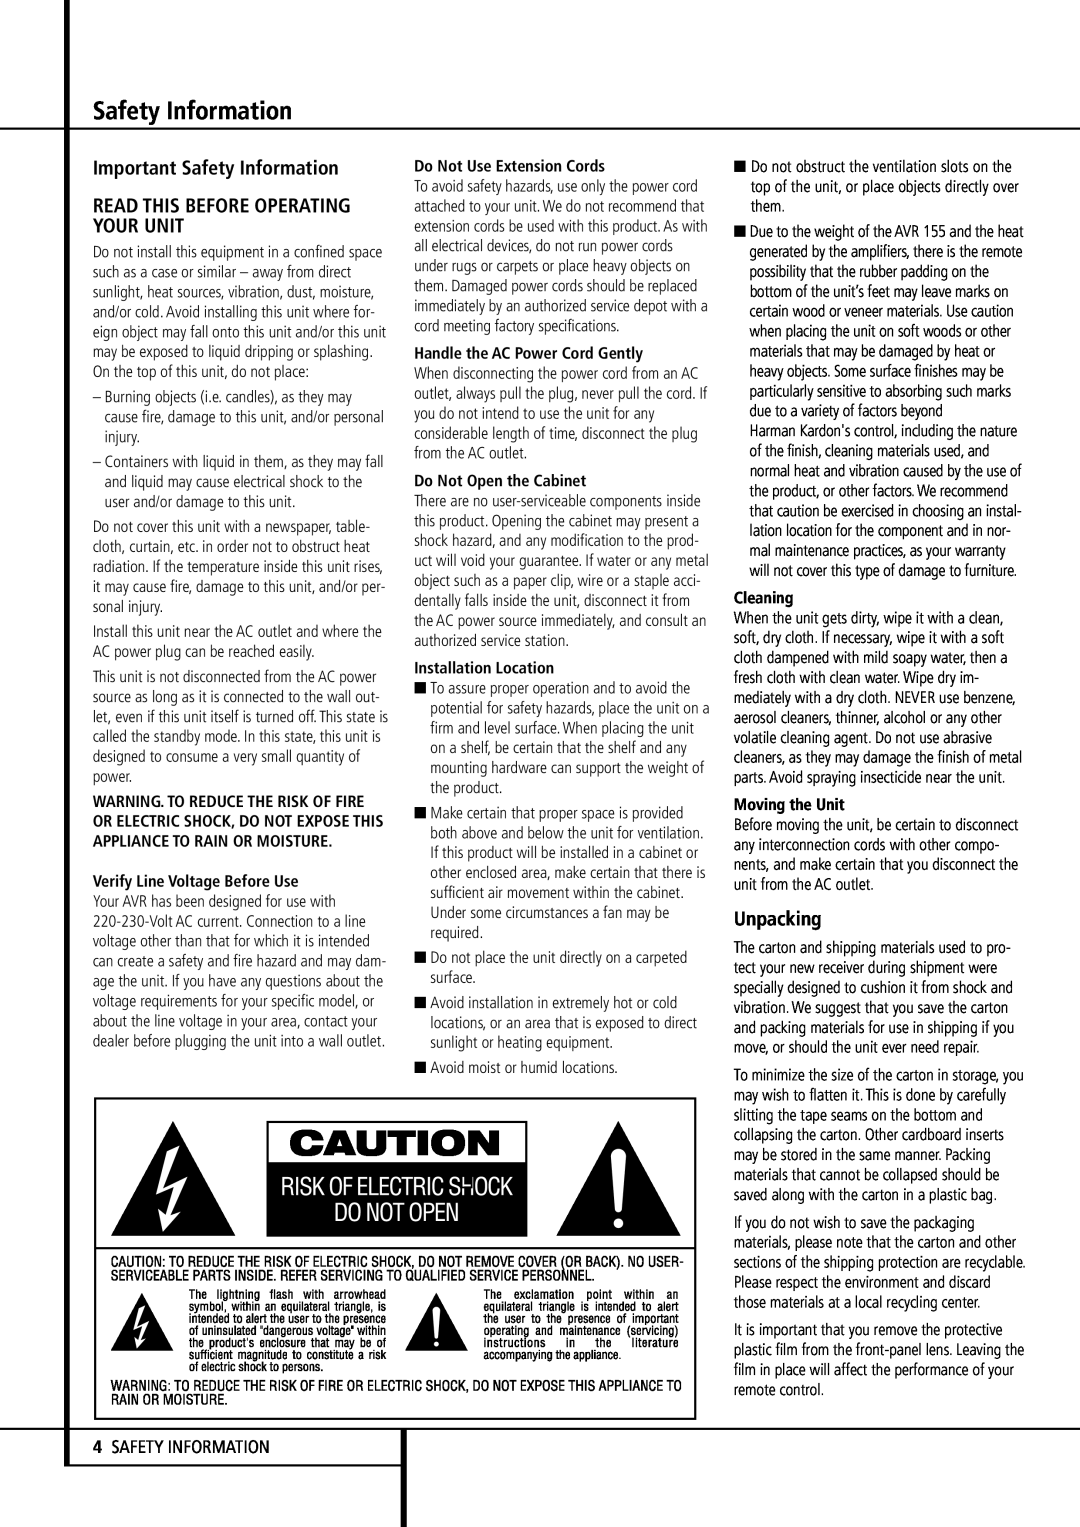 Harman-Kardon AVR 155 Important Safety Information, Read This Before Operating Your Unit, Unpacking, Cleaning 